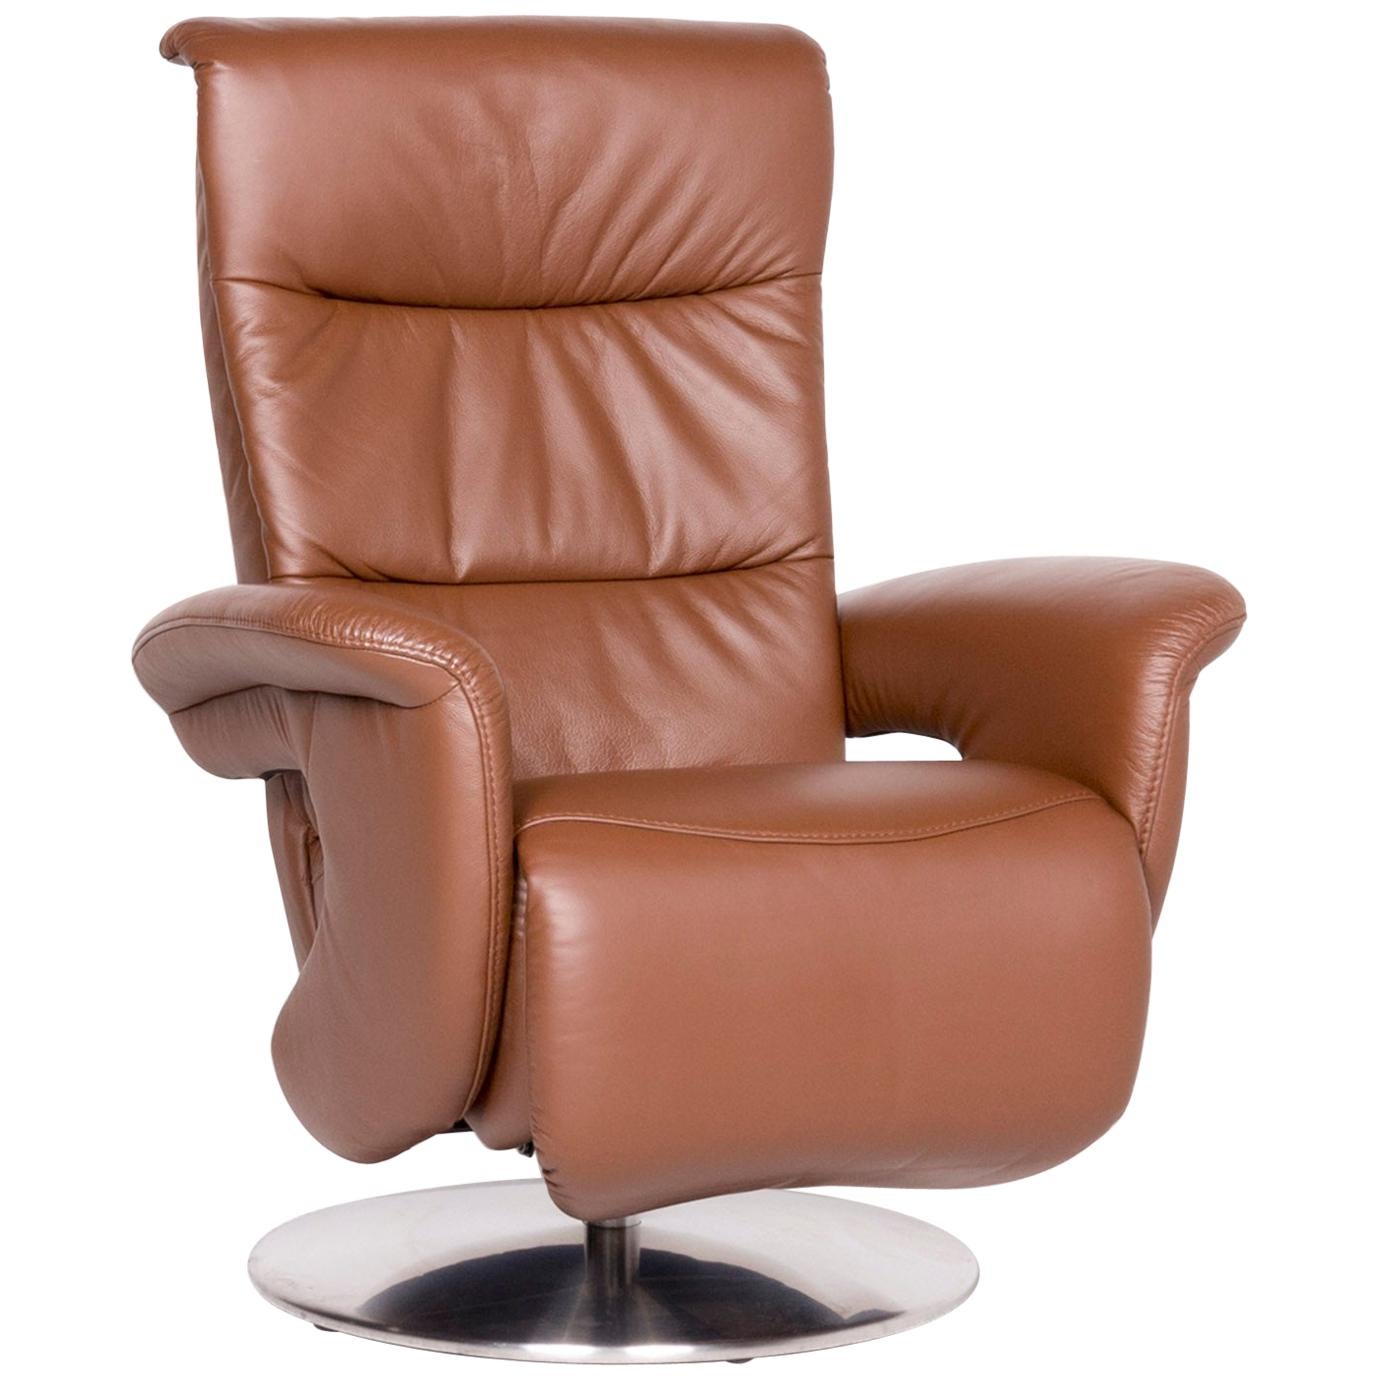 Himolla Designer Leather Armchair Brown Genuine Leather Chair